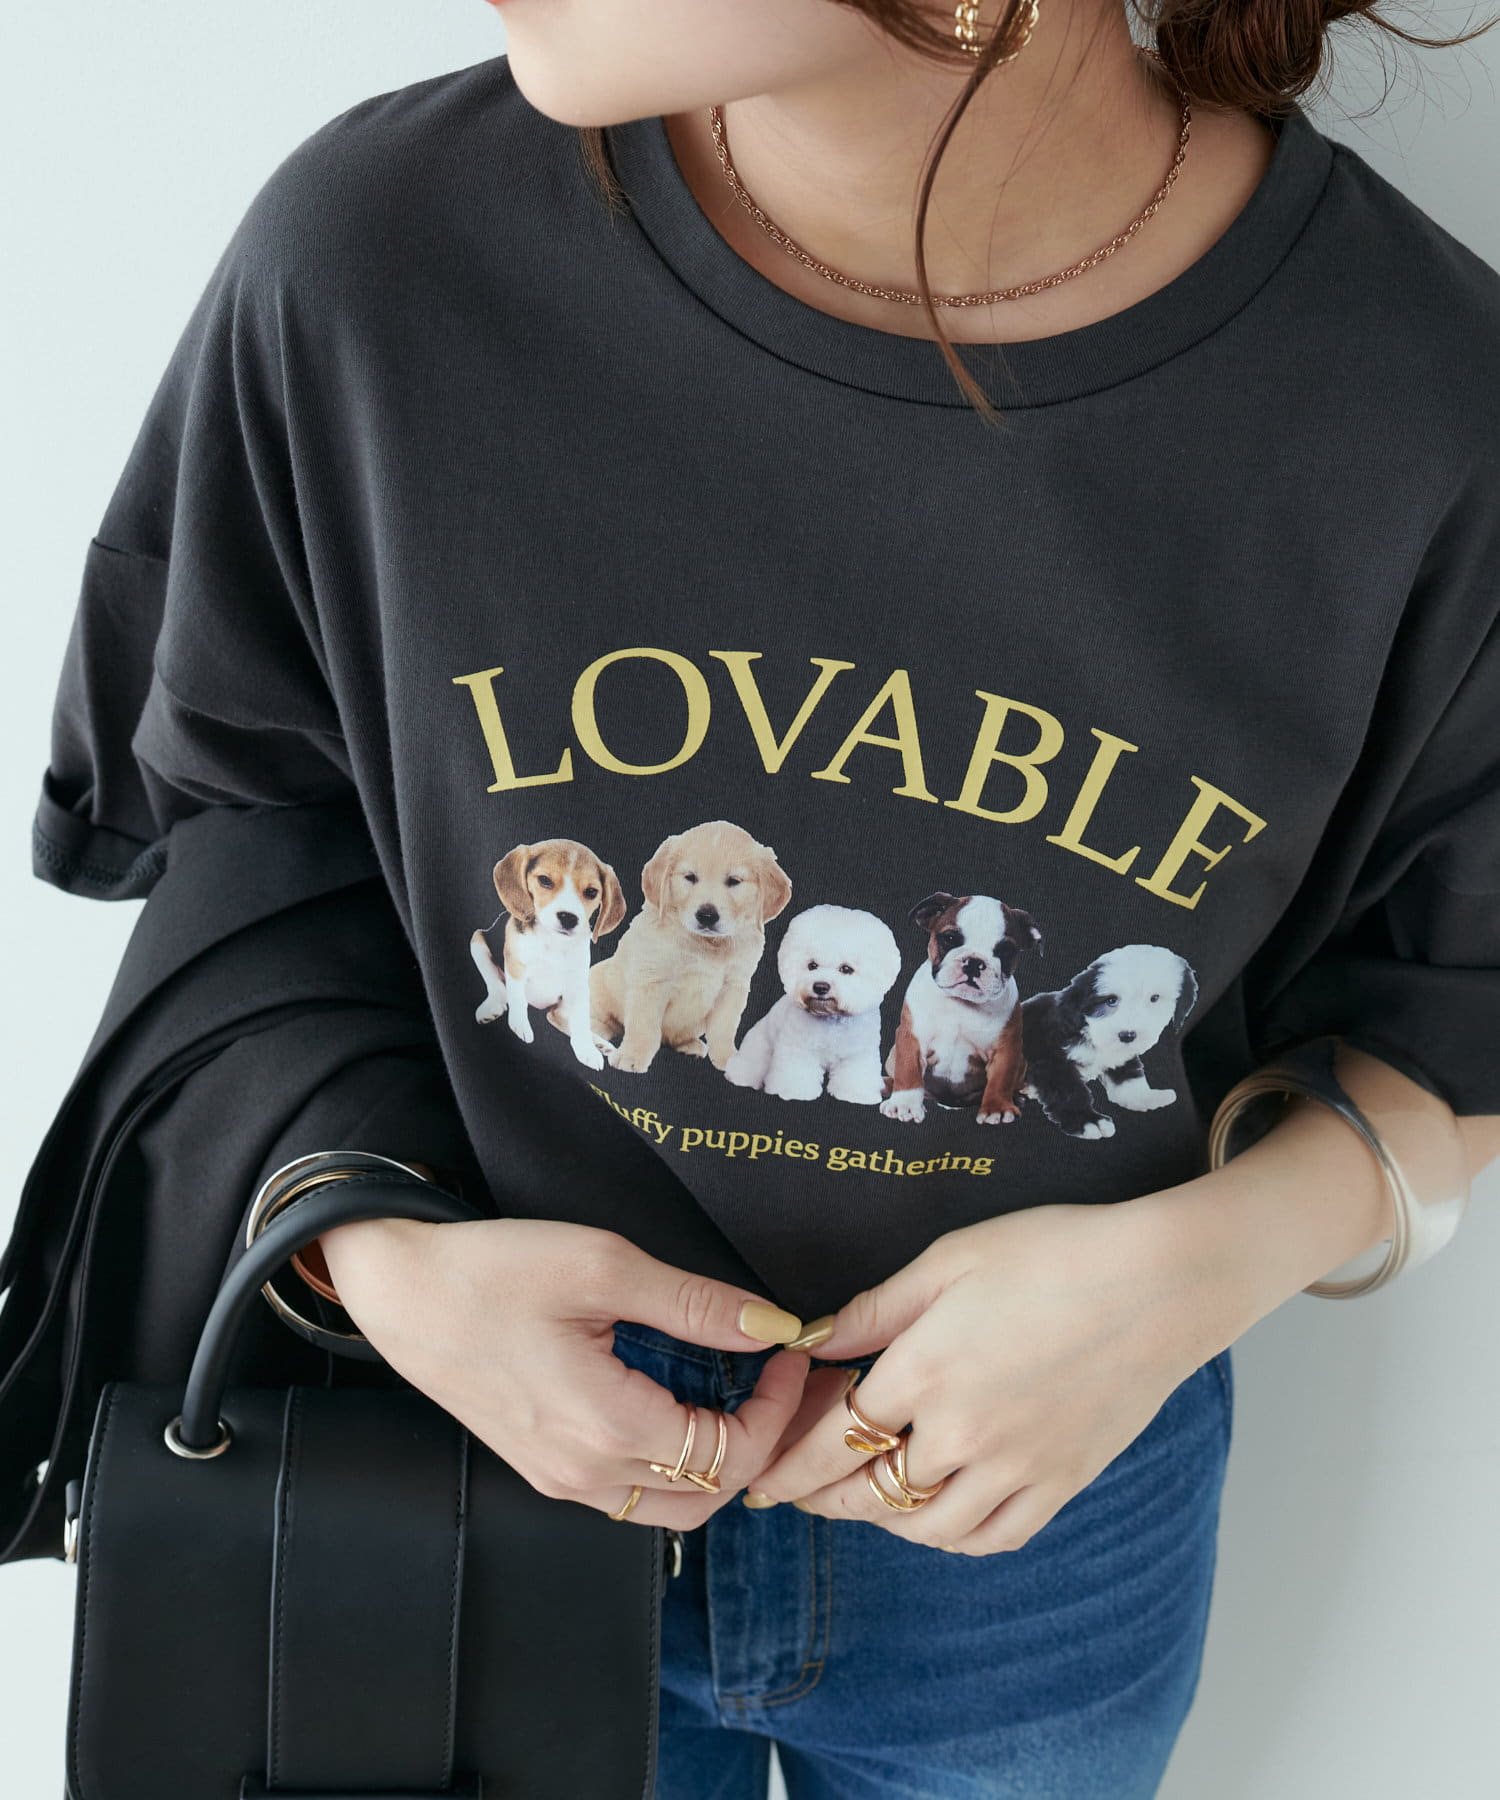 NICE CLAUP OUTLET(ナイスクラップ アウトレット) 子犬プリントTシャツ